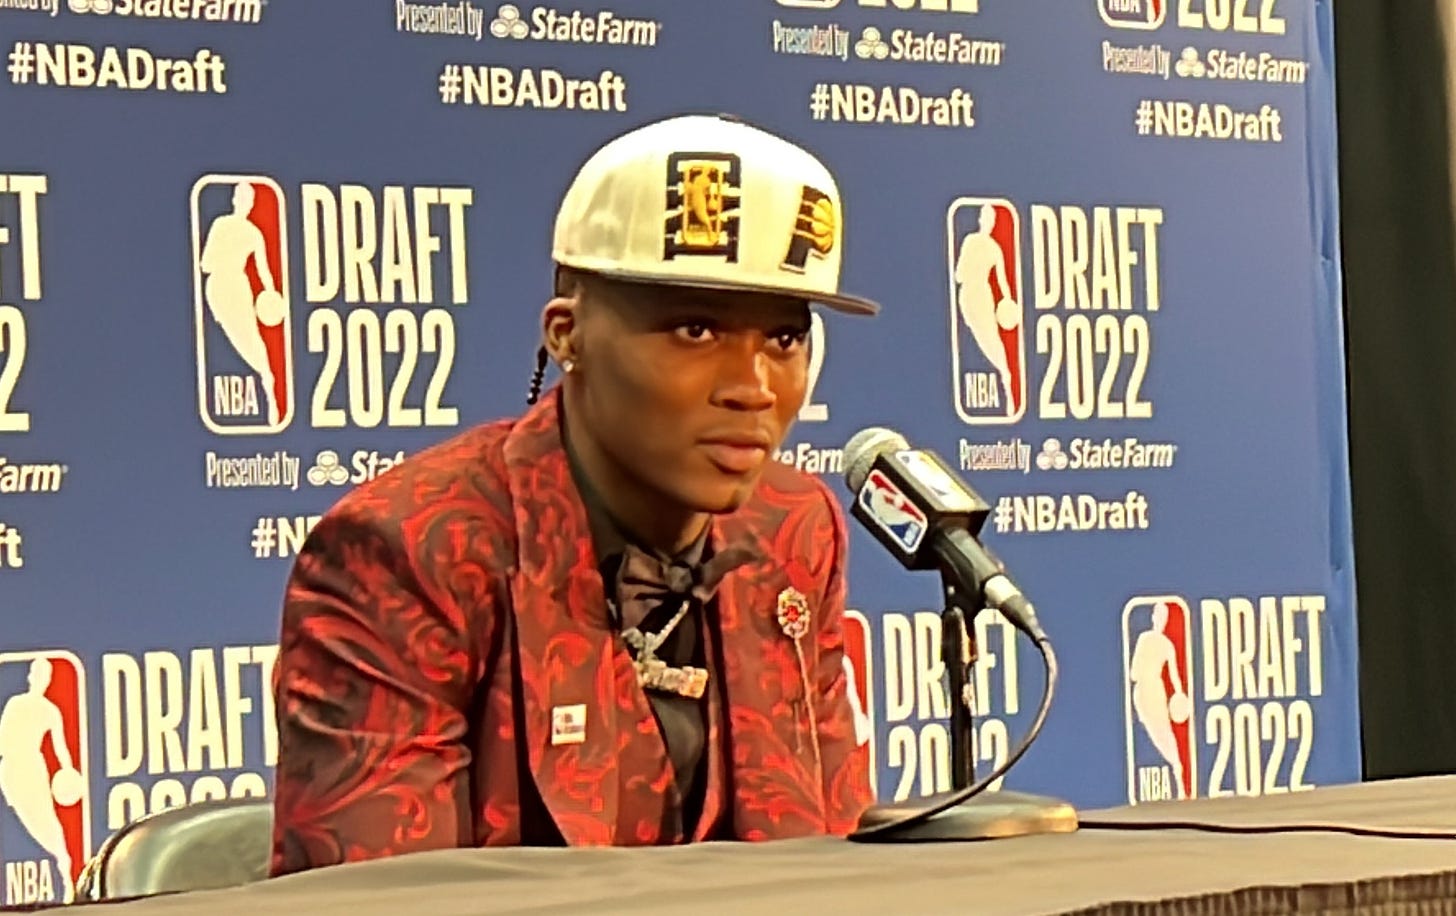 Benn Mathurin at the podium after being drafted by the Pacers.